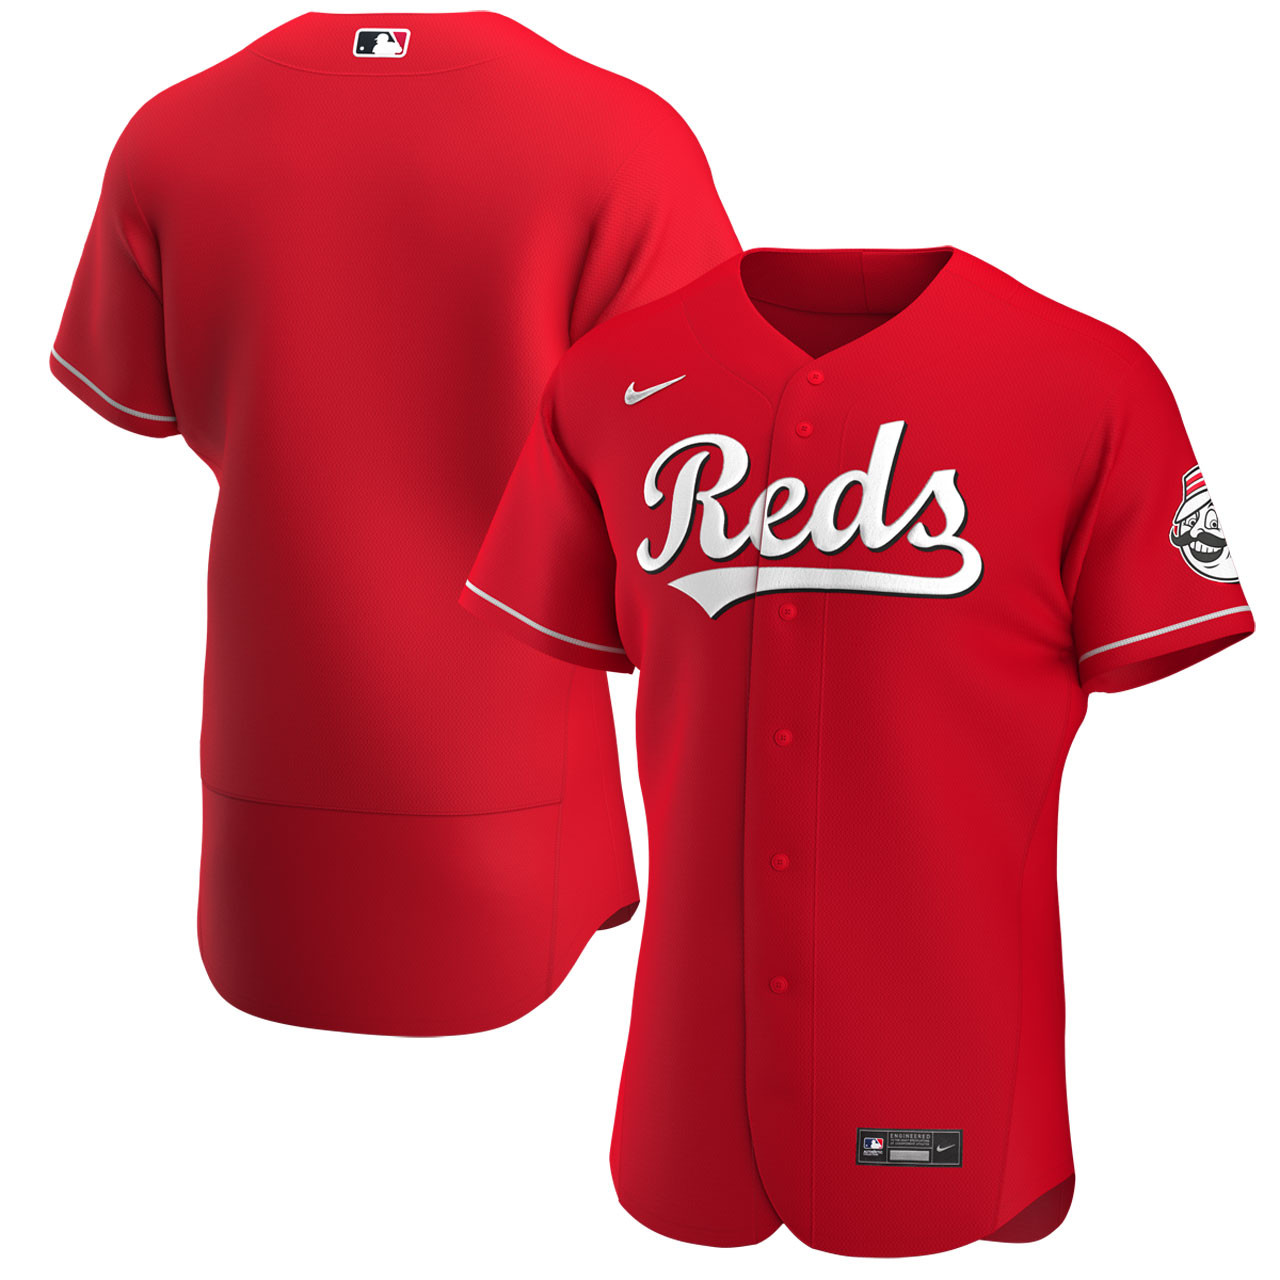 Cincinnati Reds Red Alternate Authentic Jersey by Nike